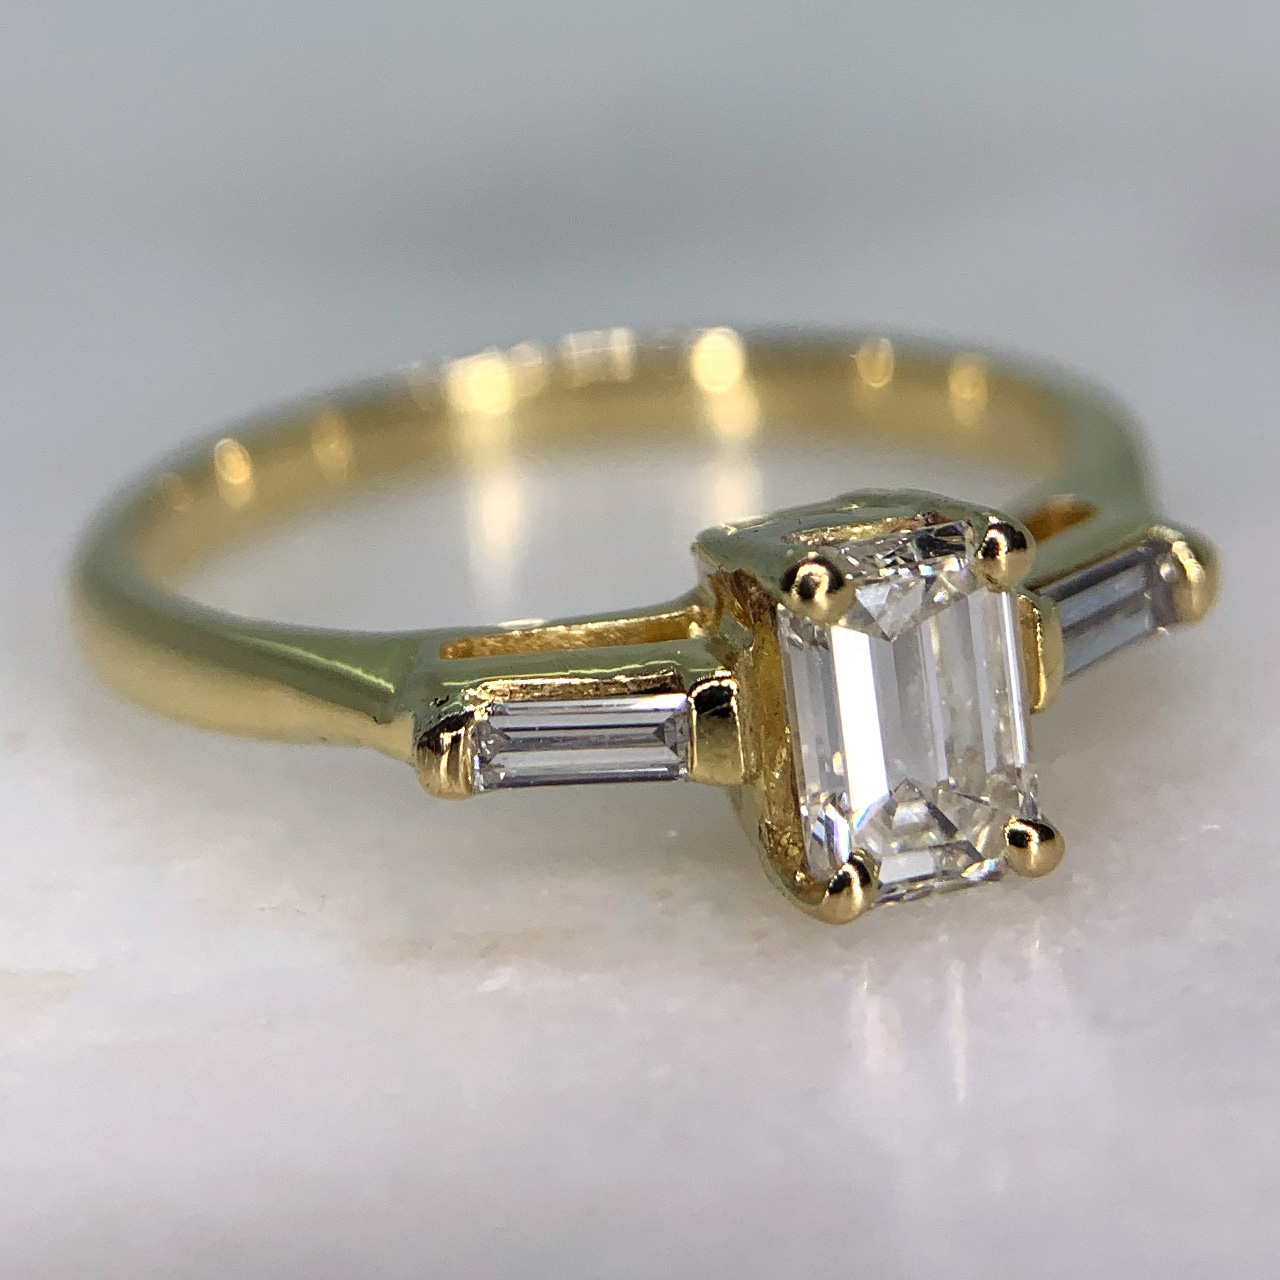 Stunning Baguette Diamond Trilogy Ring in 18ct Hallmarked yellow gold, London (1991). The ring is decorated with an 6 mm x 4.5 mm (approximate) emerald cut white diamond. The shoulders are embellished with two 3.5 mm x 1.3 mm baguette diamonds. All stones are claw set and weigh 0.60 carats of total diamond weight. This ring is in exquisite condition. 